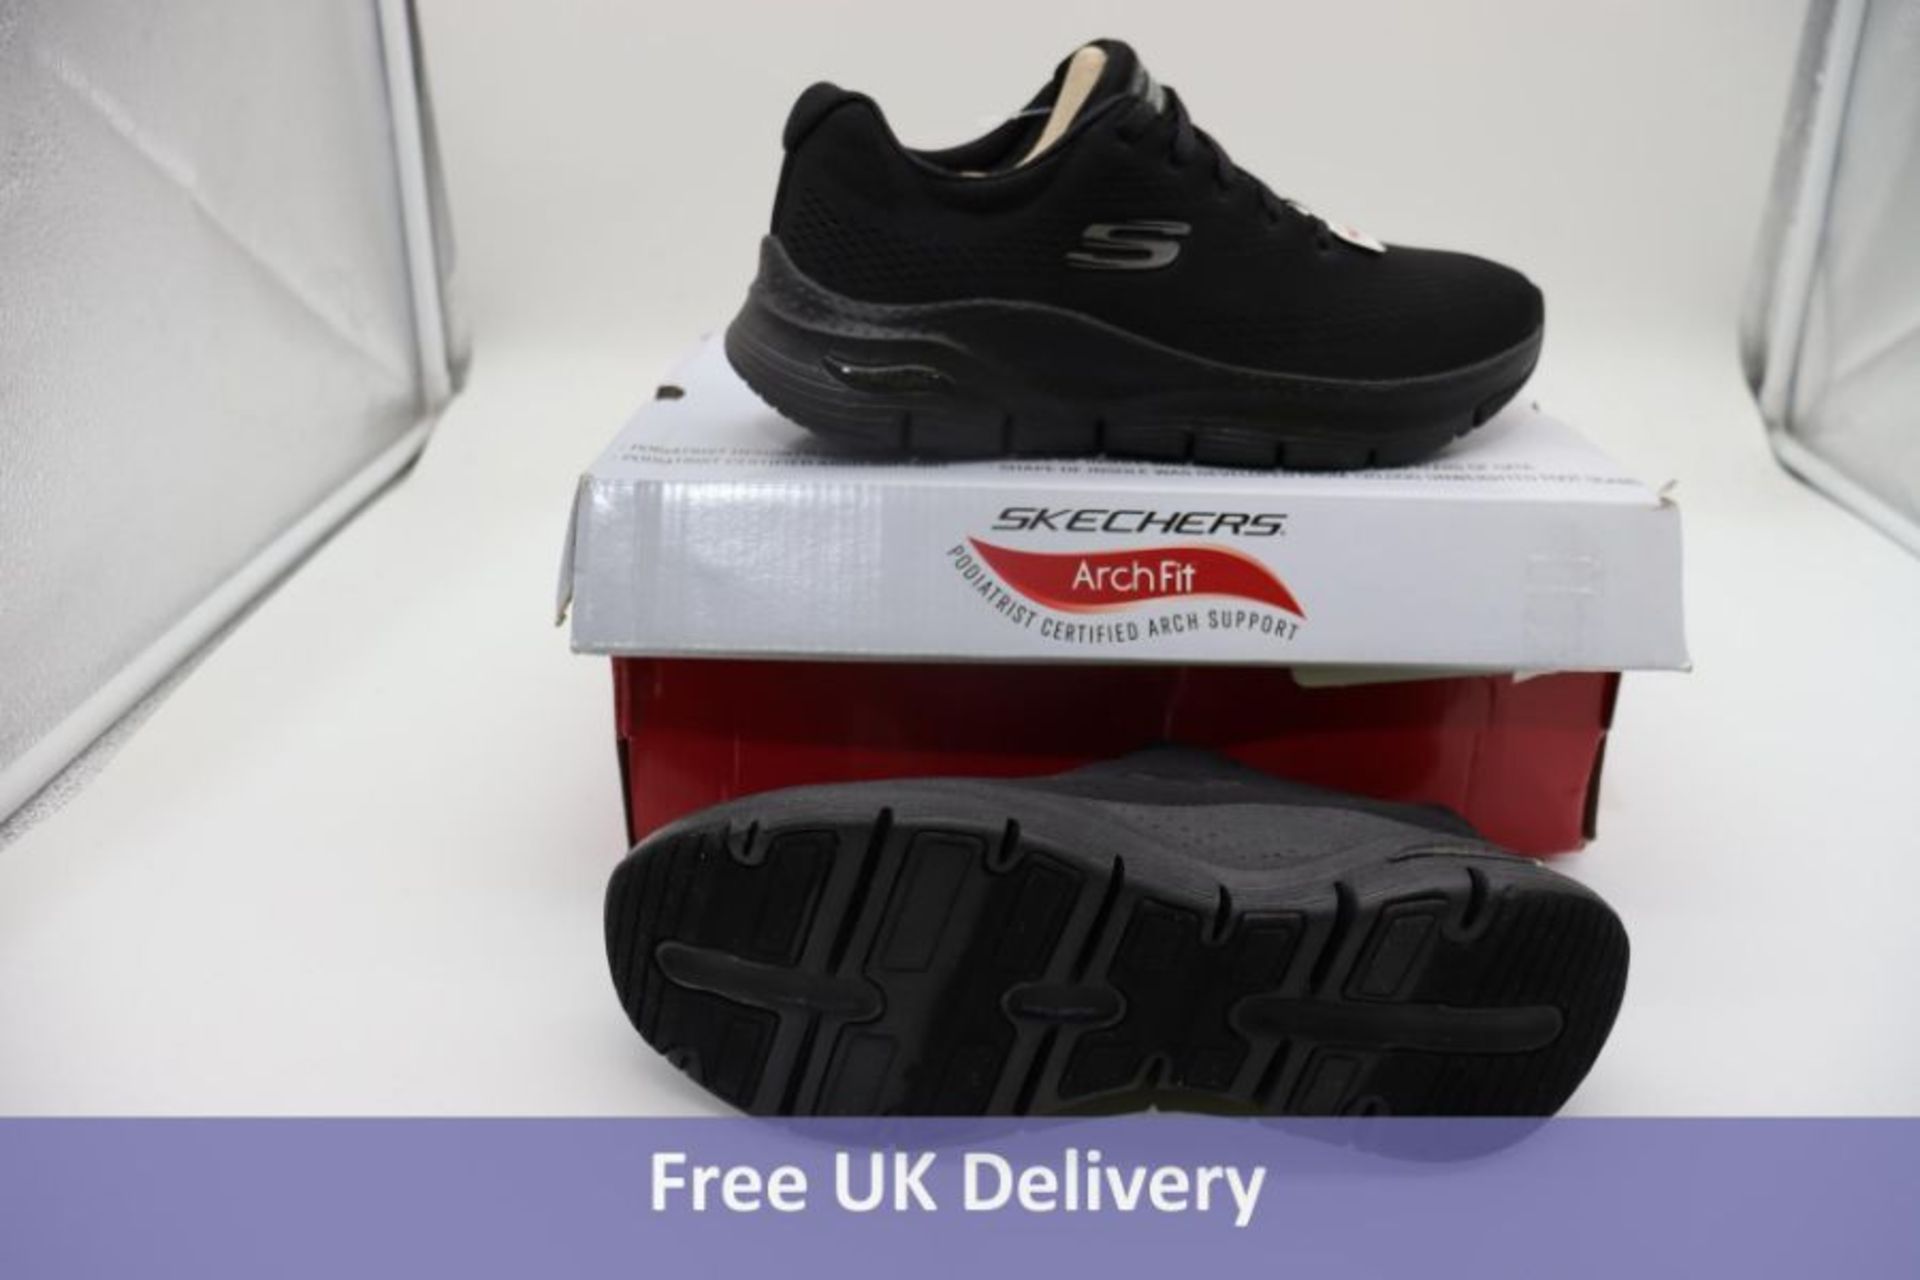 Skechers Women's Arch Fit Big Appeal Lifestyle Trainers, Black, UK 4.5. Box damaged